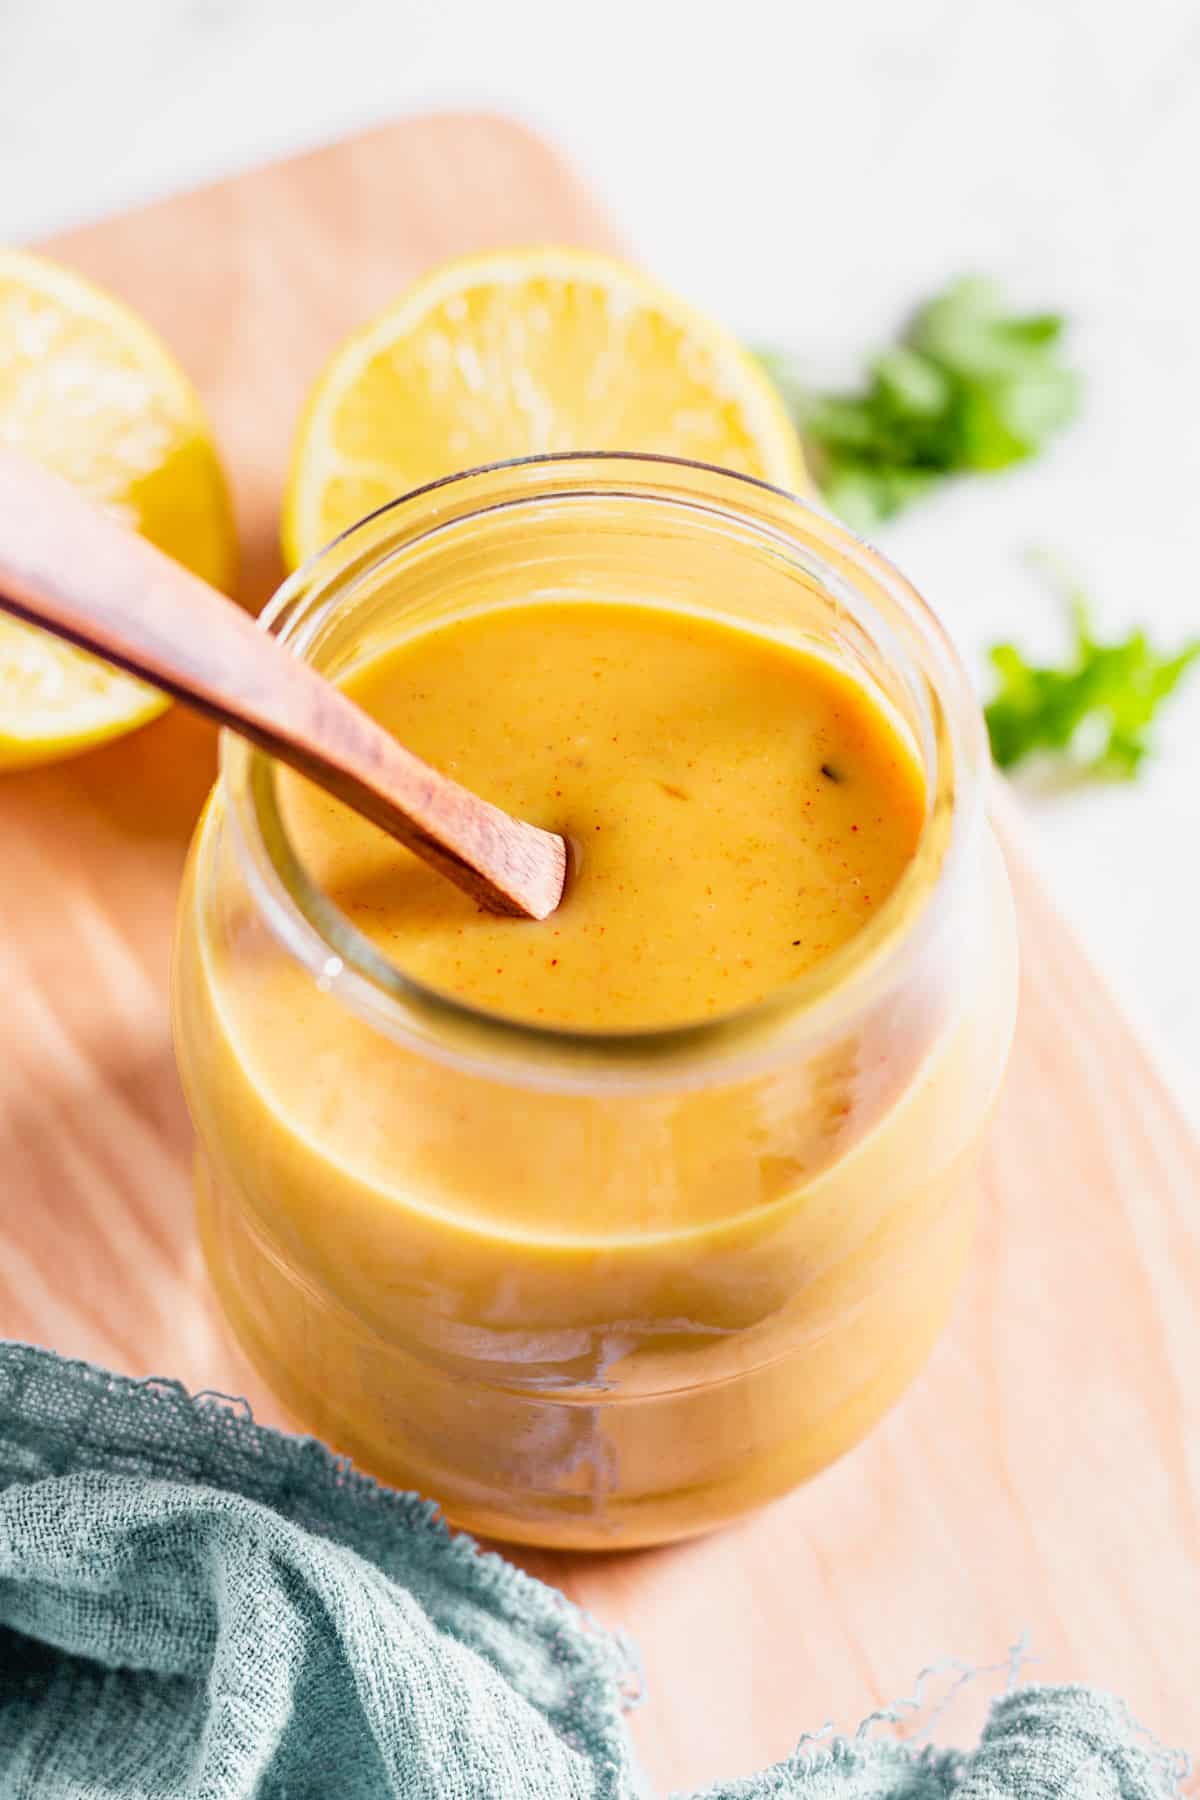 Mustard Sauce With Honey in glass jar